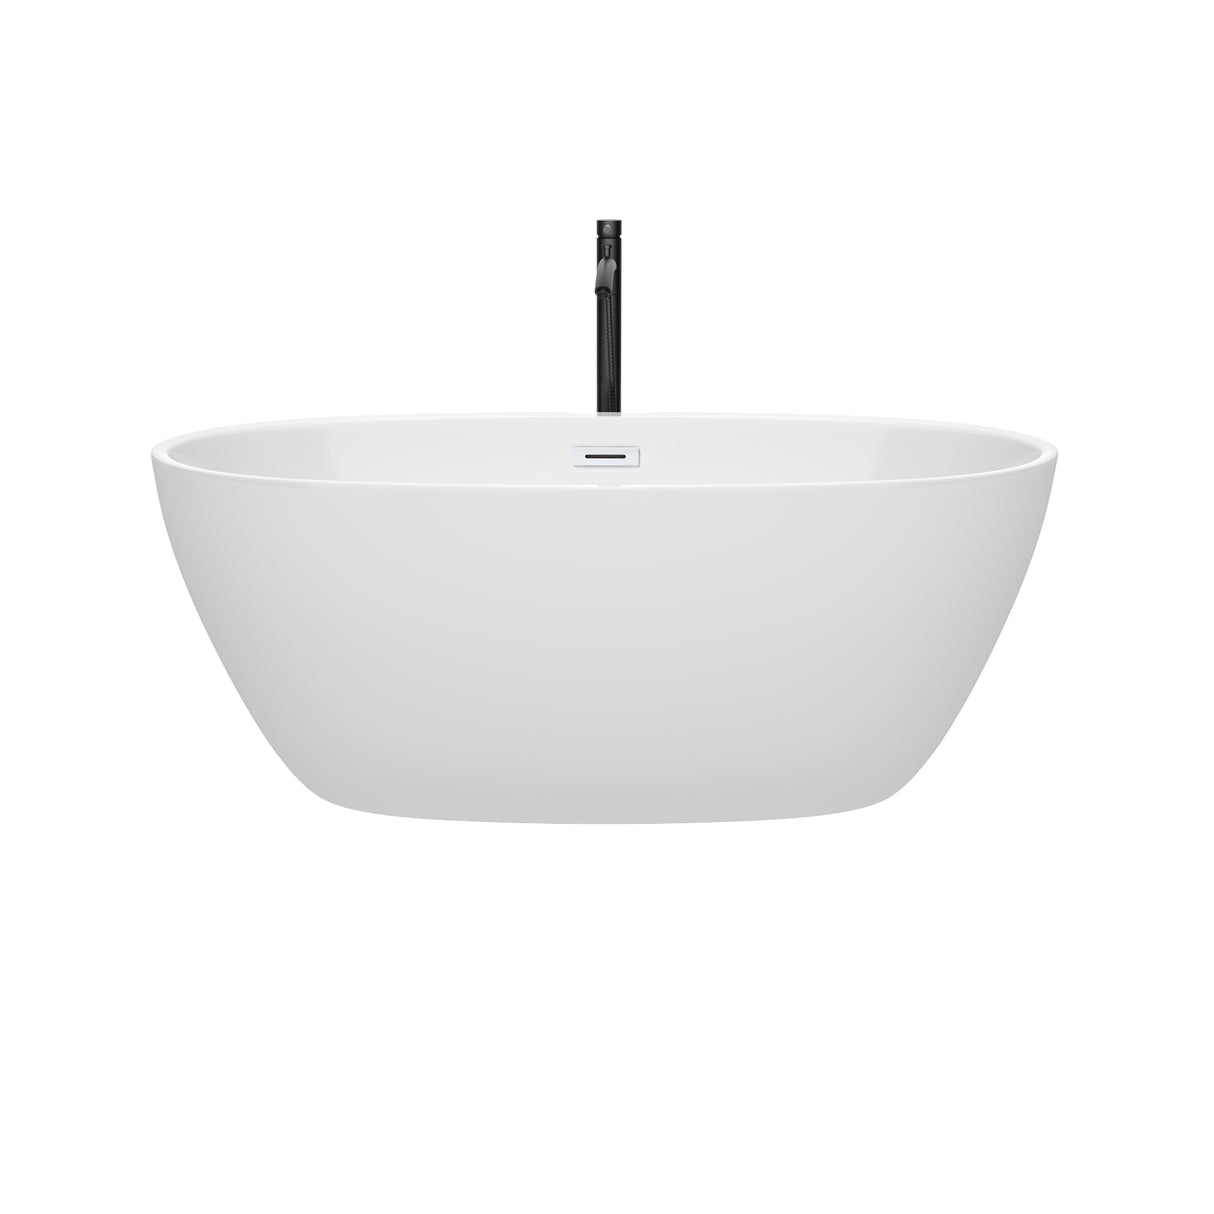 Juno 59 Inch Freestanding Bathtub in White with Shiny White Trim and Floor Mounted Faucet in Matte Black